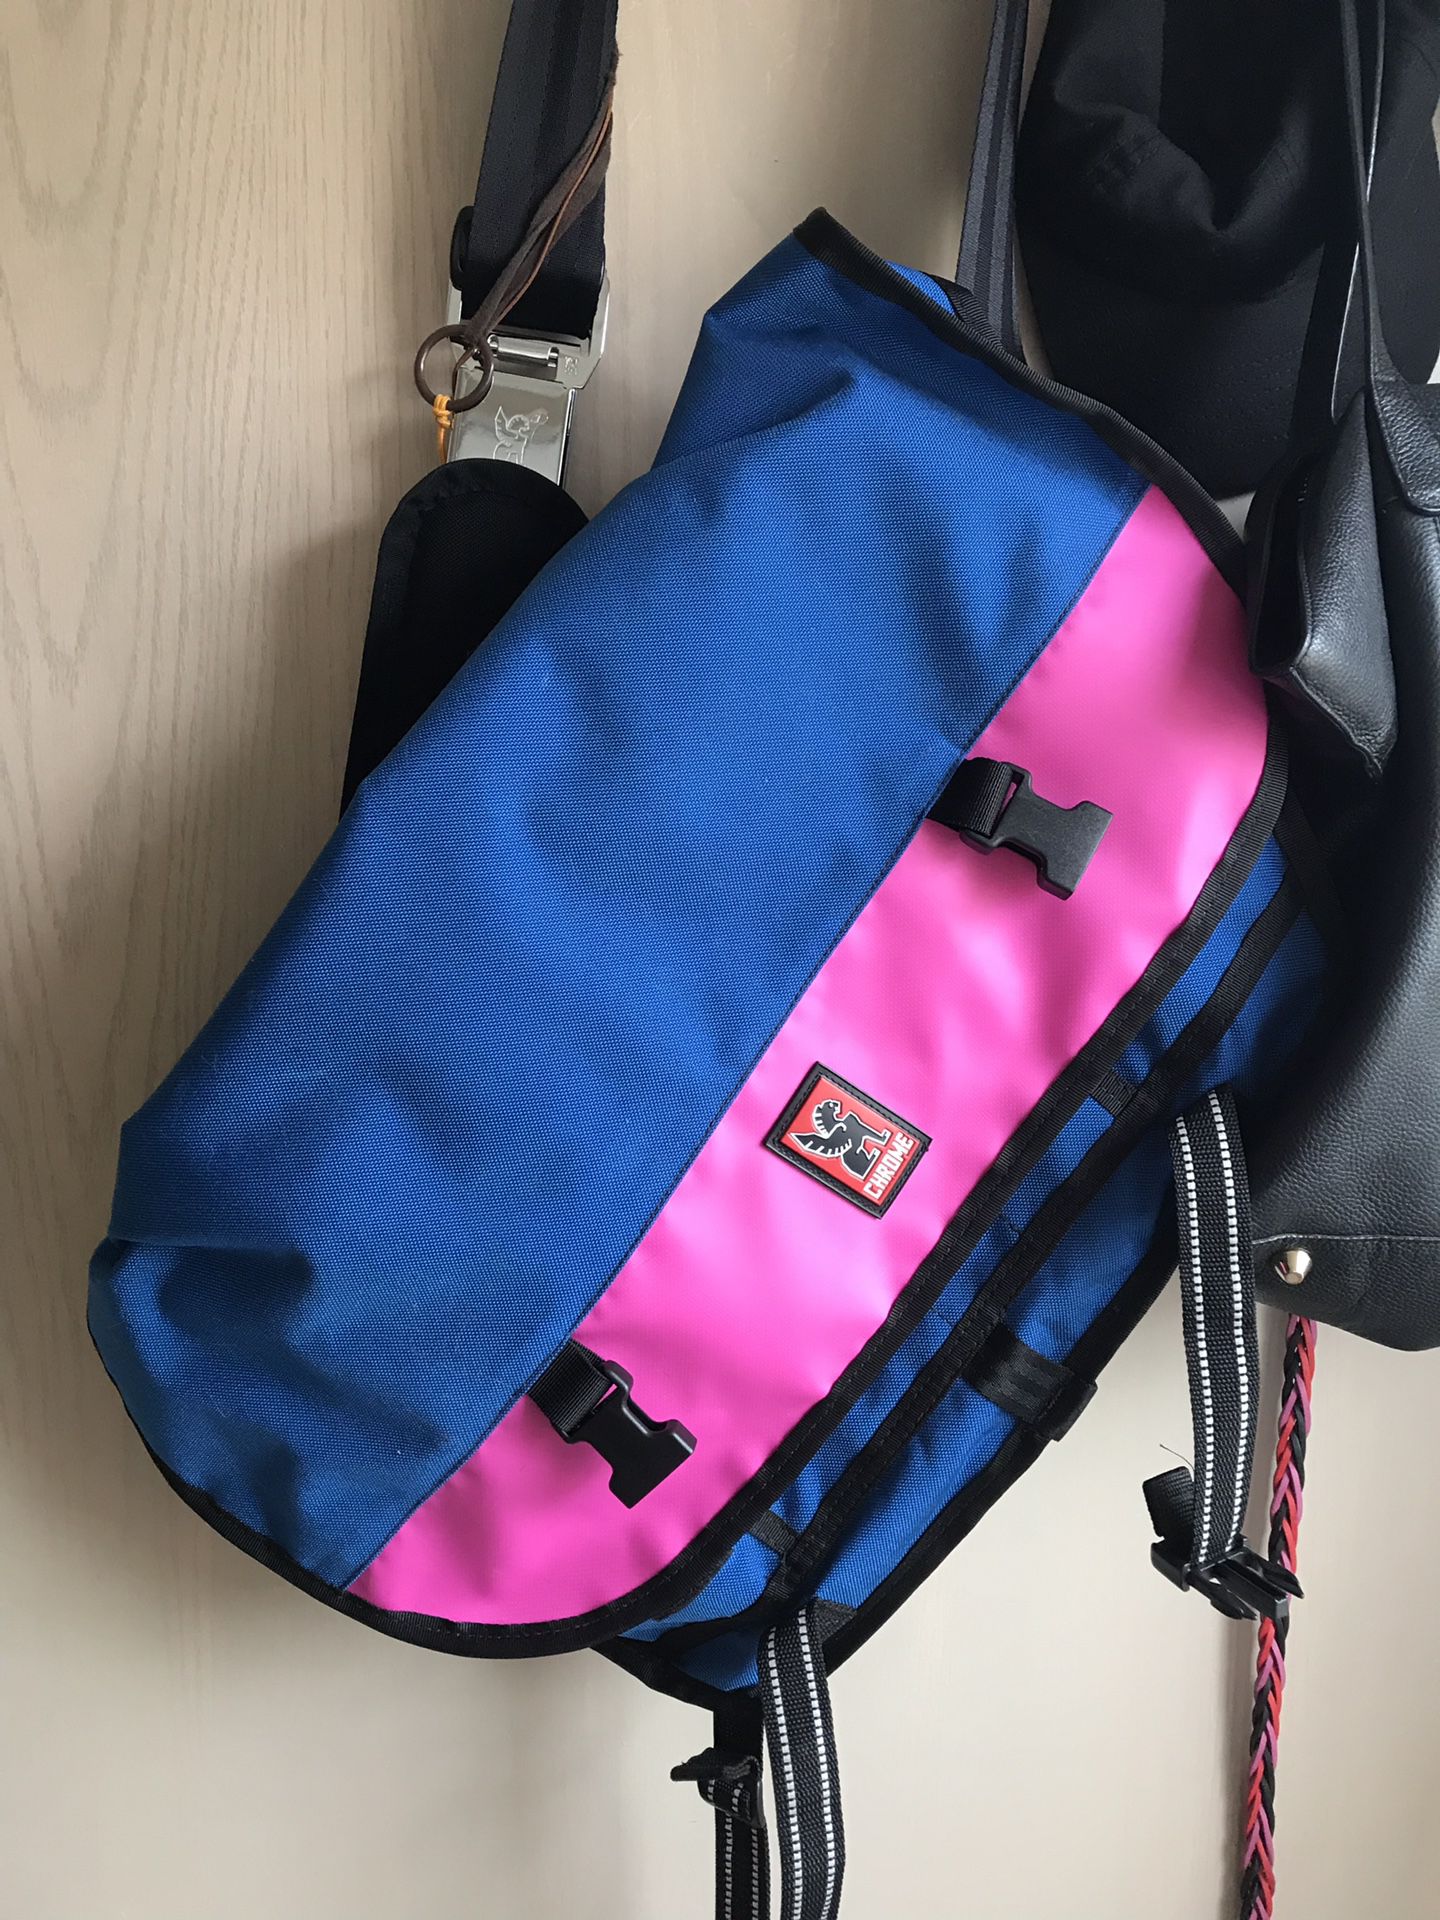 Blue and Pink Chrome Messenger Bag - Perfect condition!